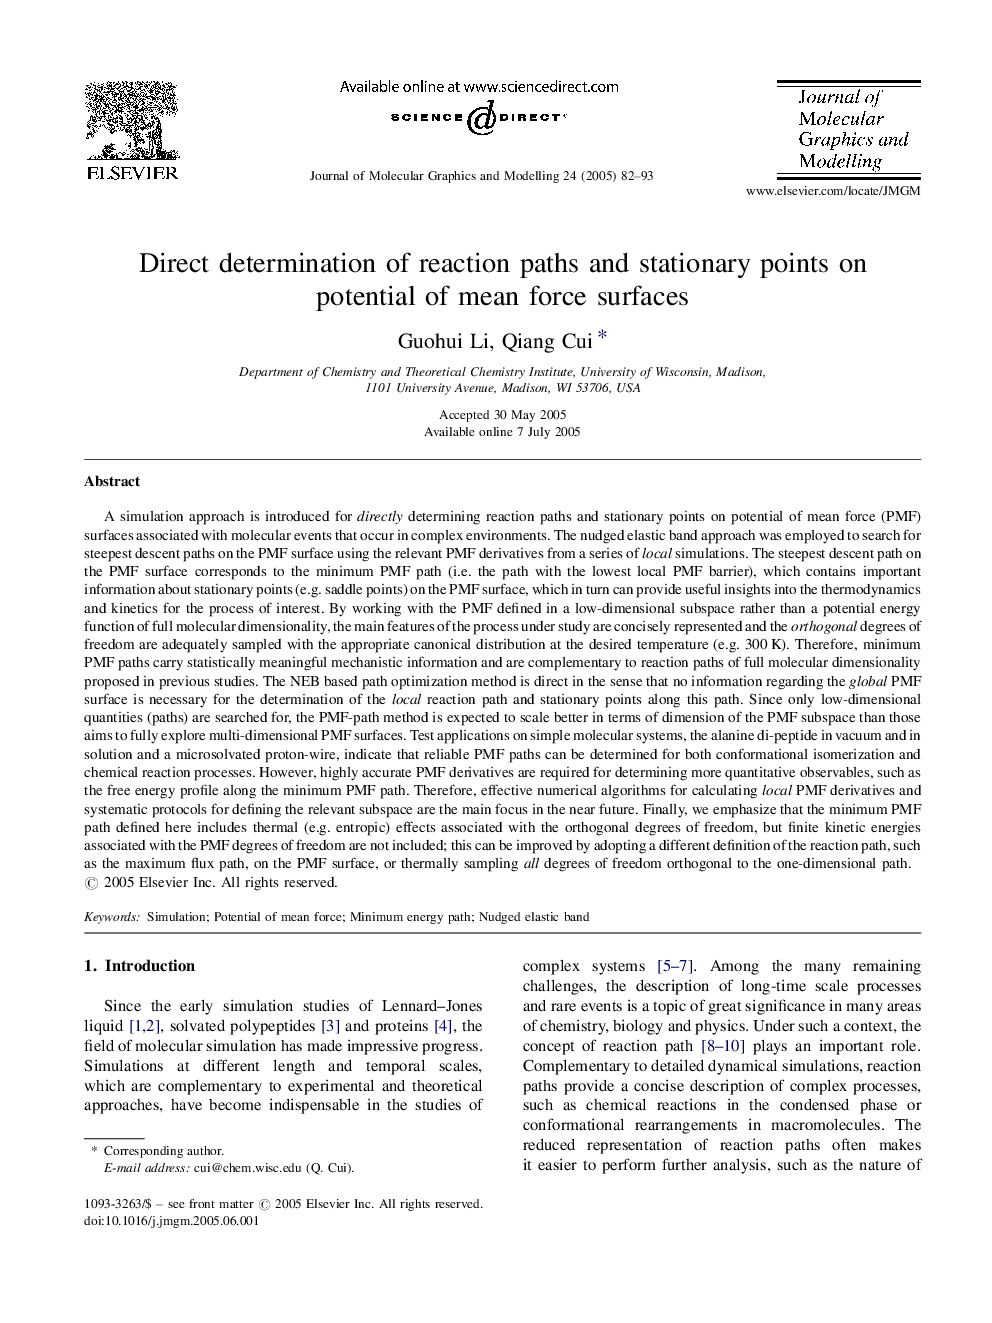 Direct determination of reaction paths and stationary points on potential of mean force surfaces